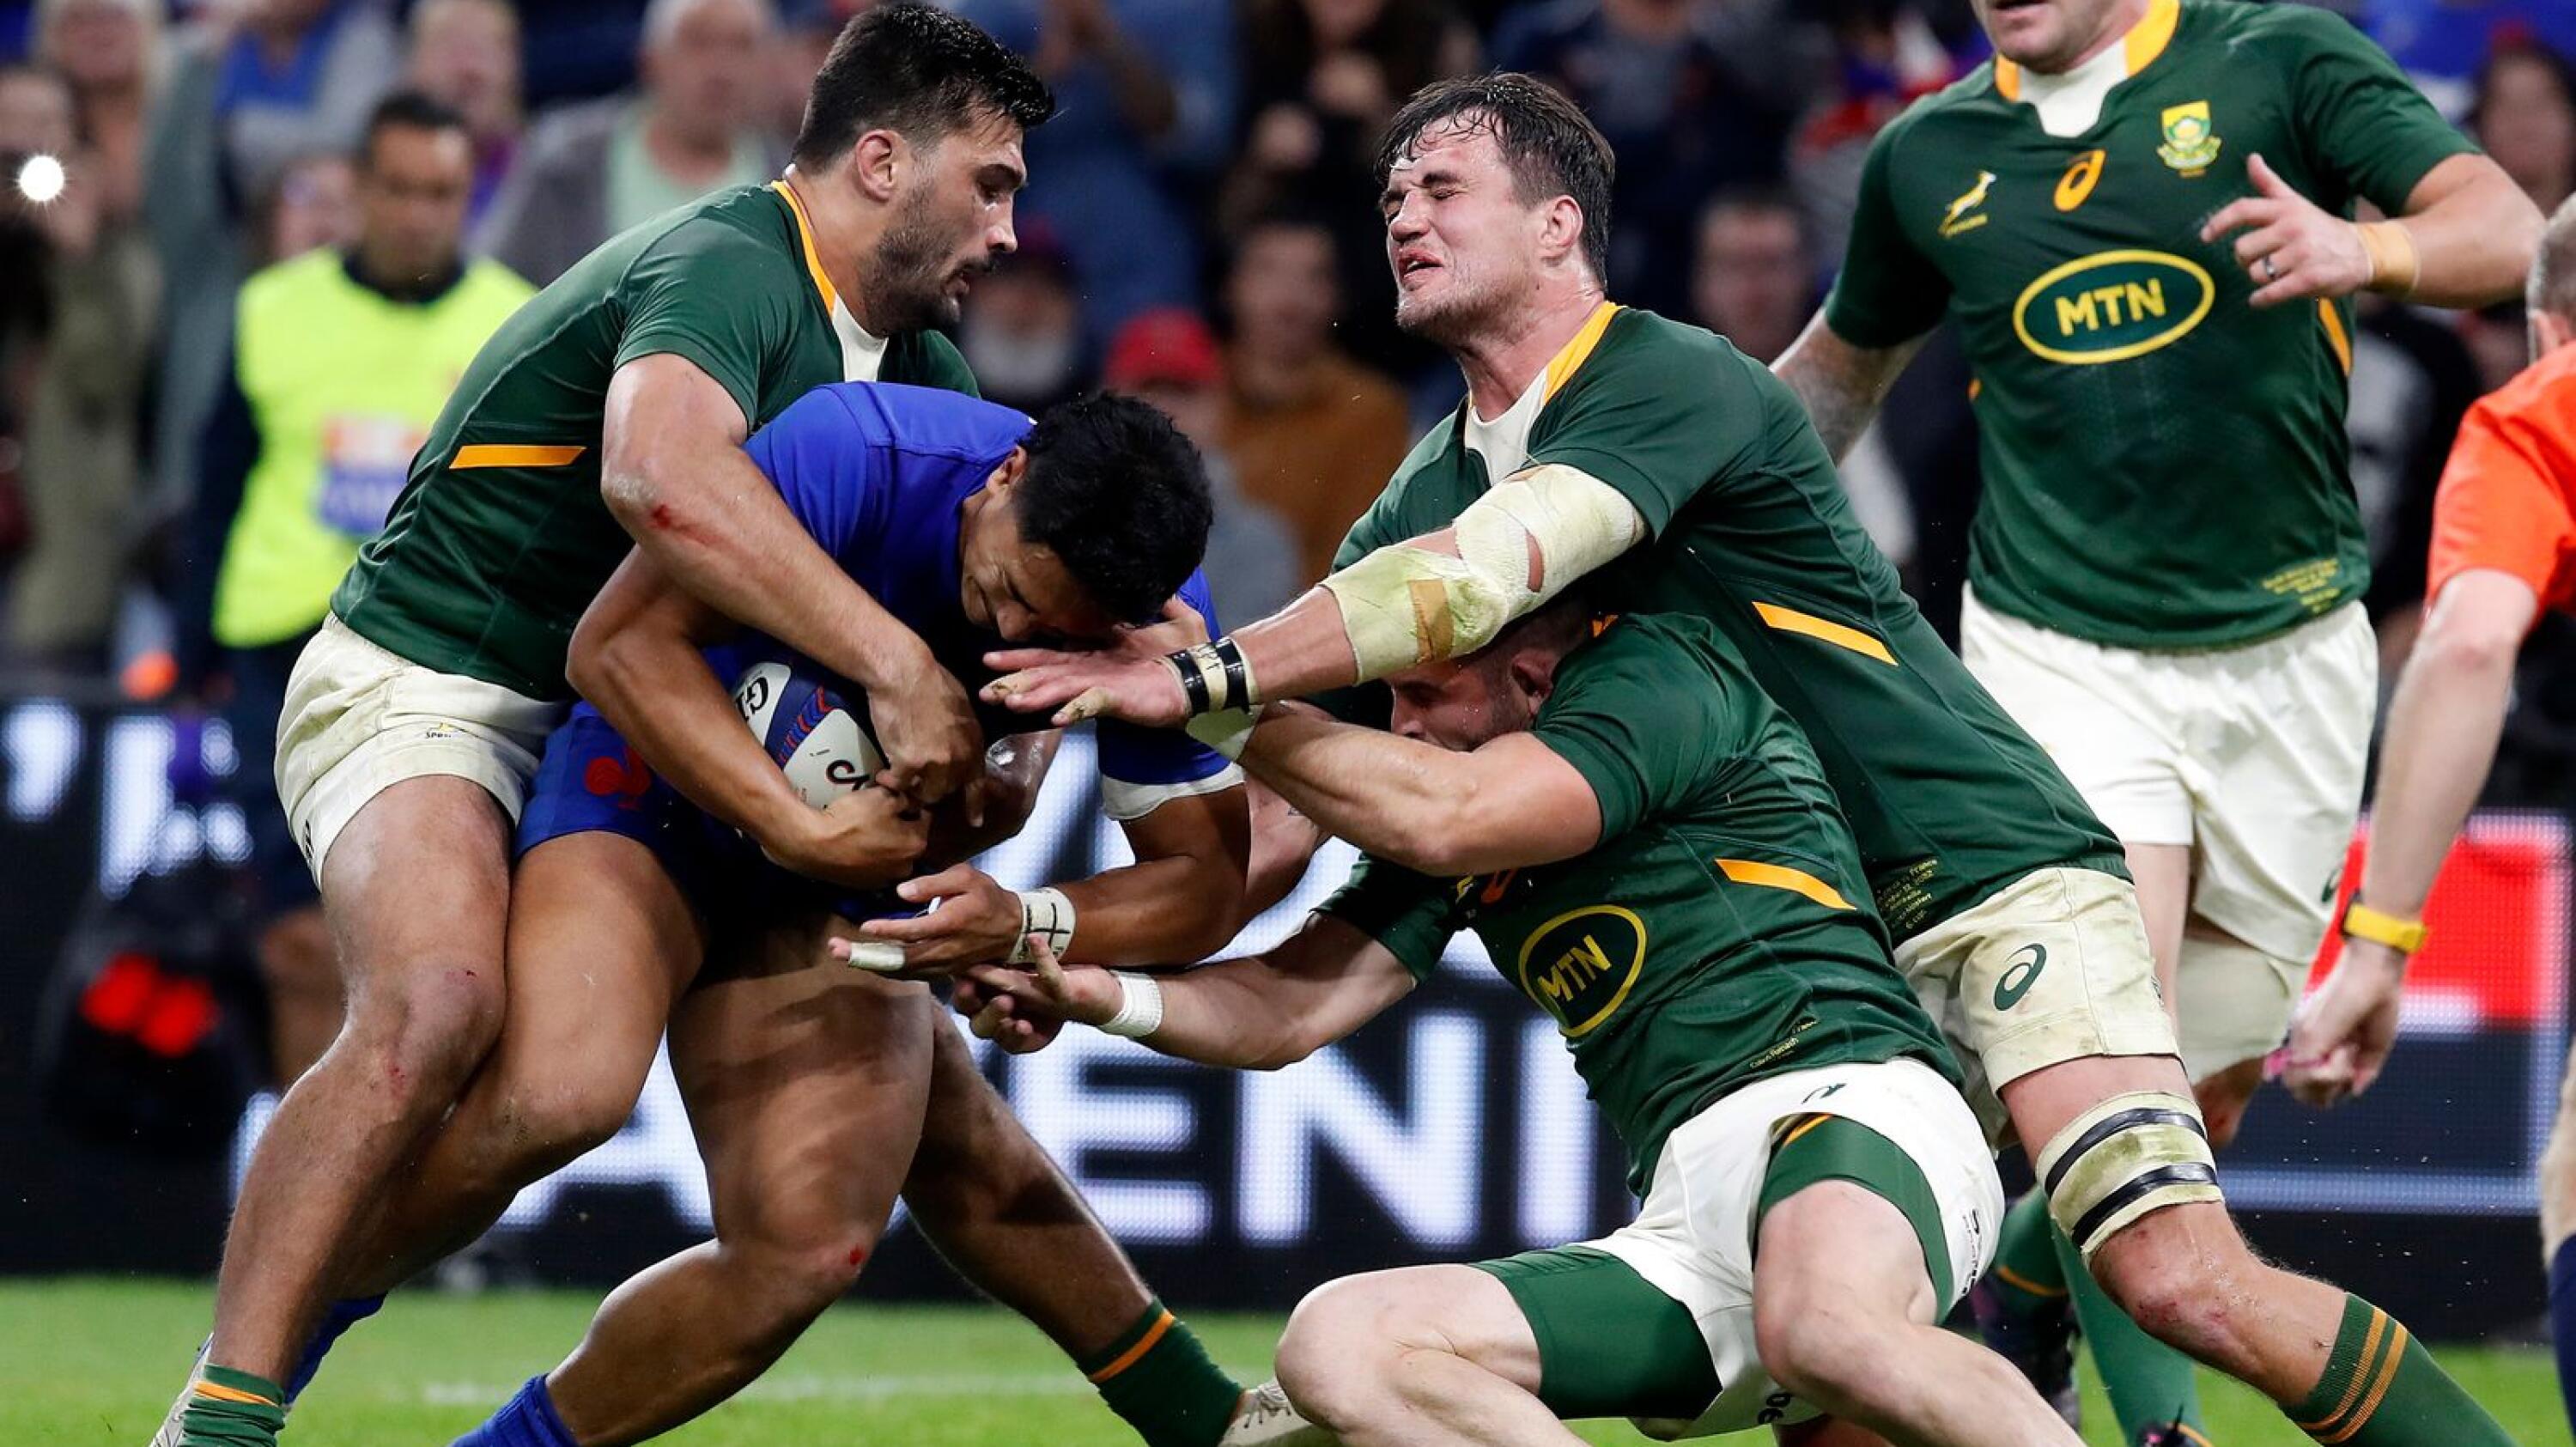 Springbok rugby players in green attempt to tackle a French rugby player in blue with the ball